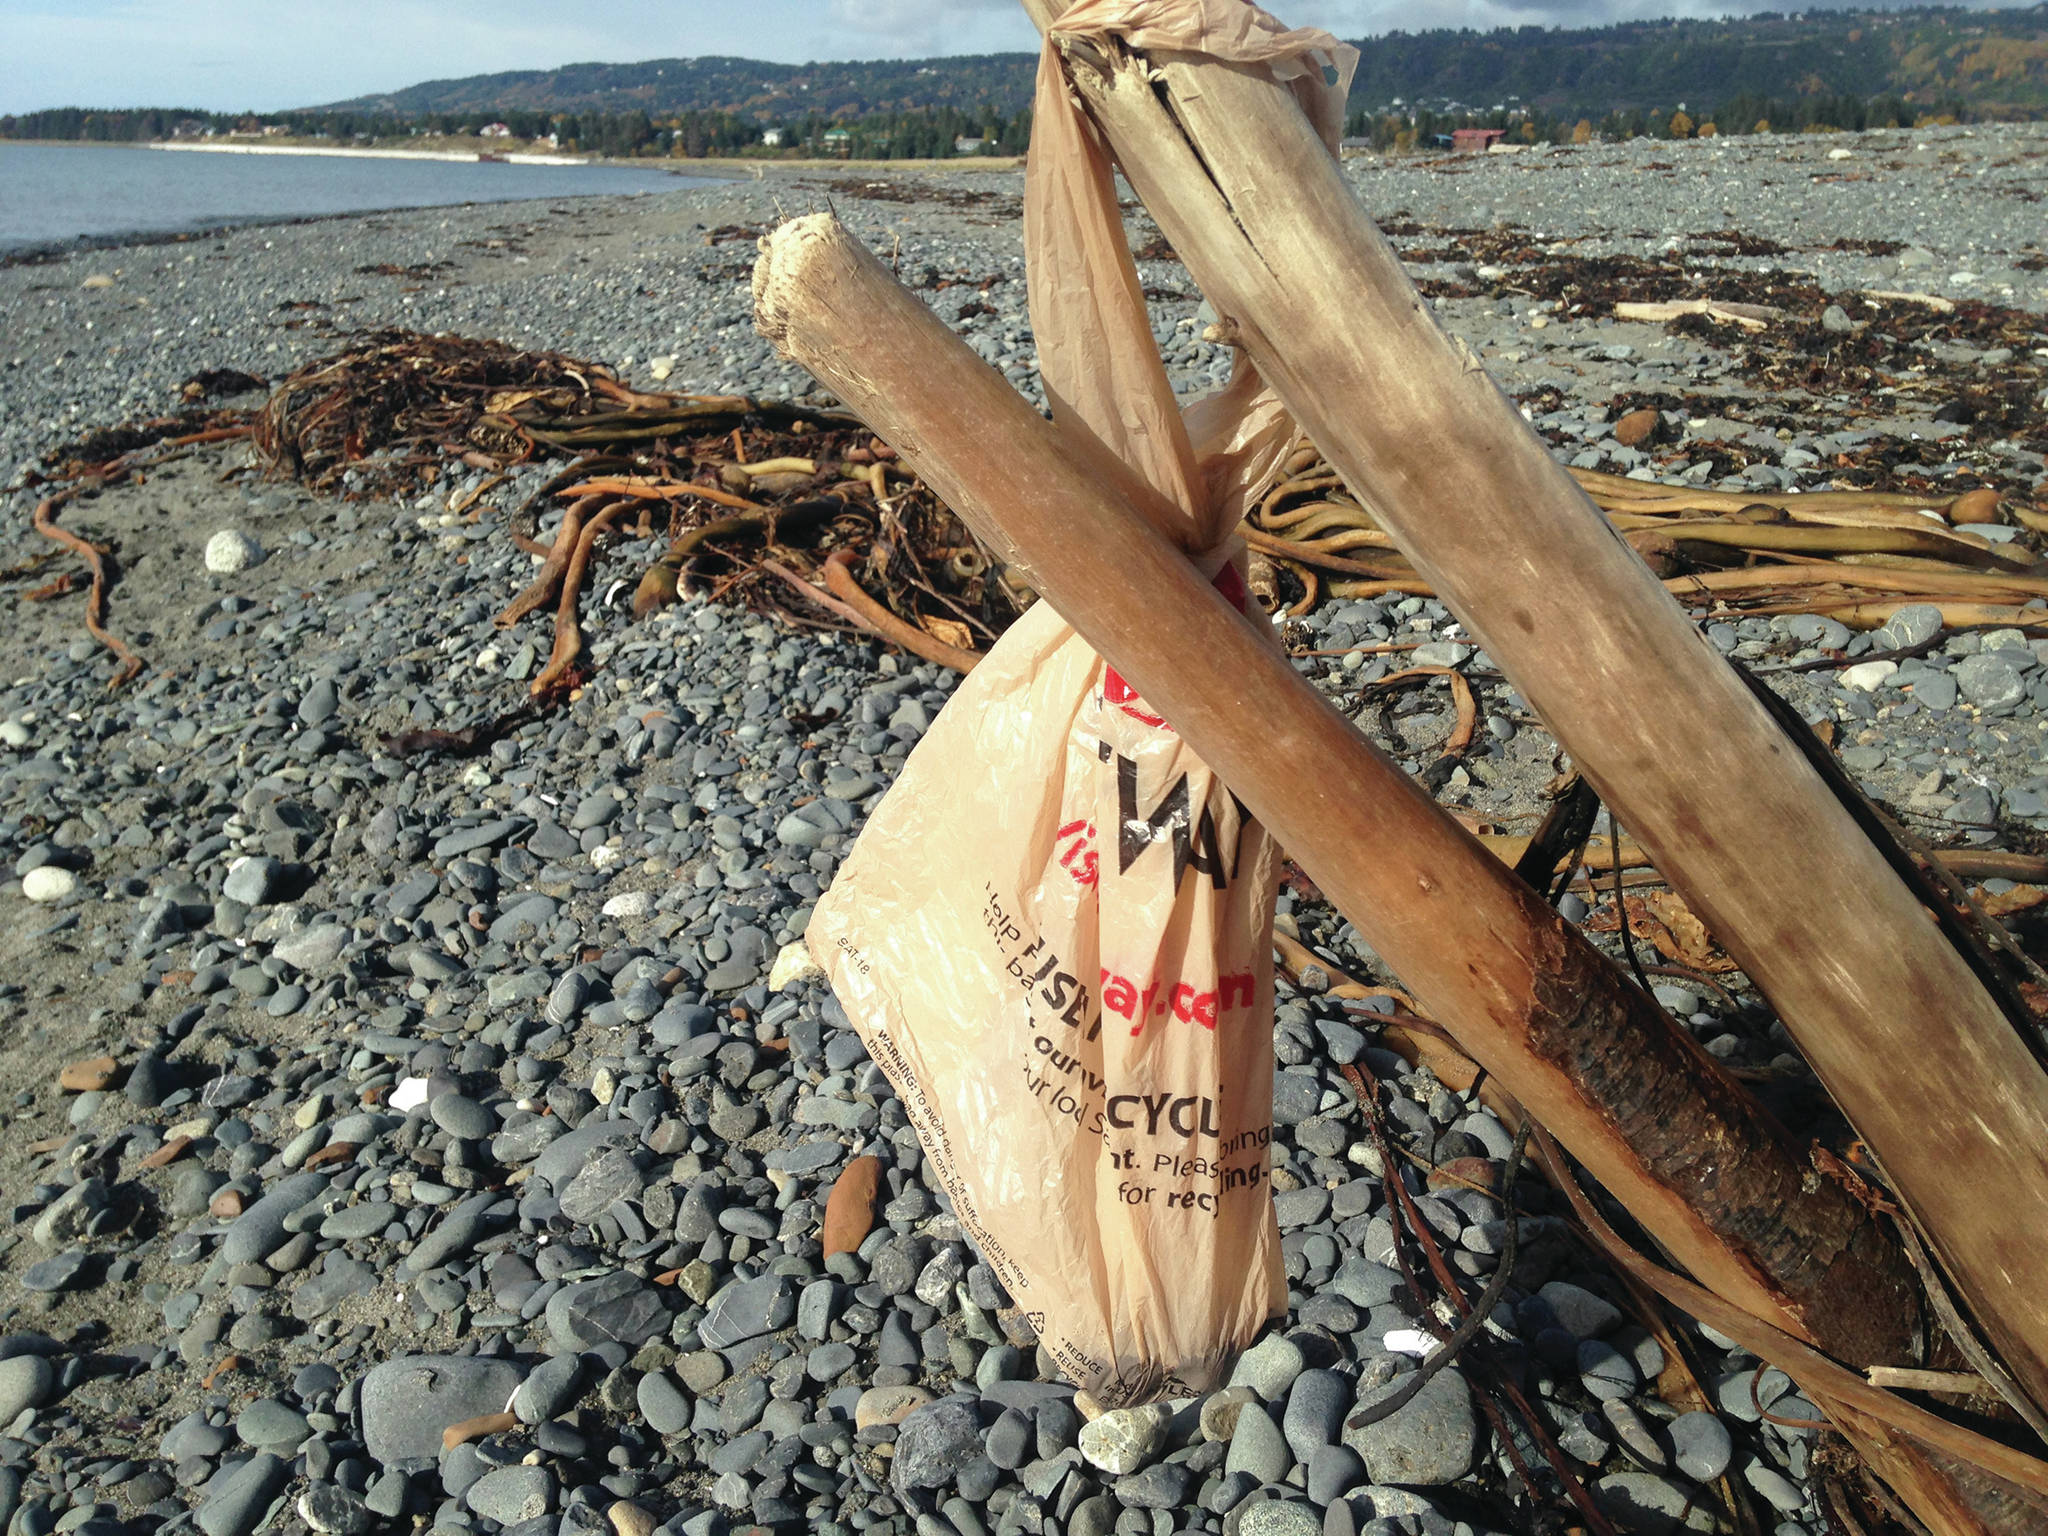 A single-use plastic bag hangs on a driftwood branch at Mariner Park on the Homer Spit on Oct. 5,2018, in Homer, Alaska. It appeared someone had reused the bag to collect dog poop but then left the bag on the beach. (Photo by Michael Armstrong/Homer News)